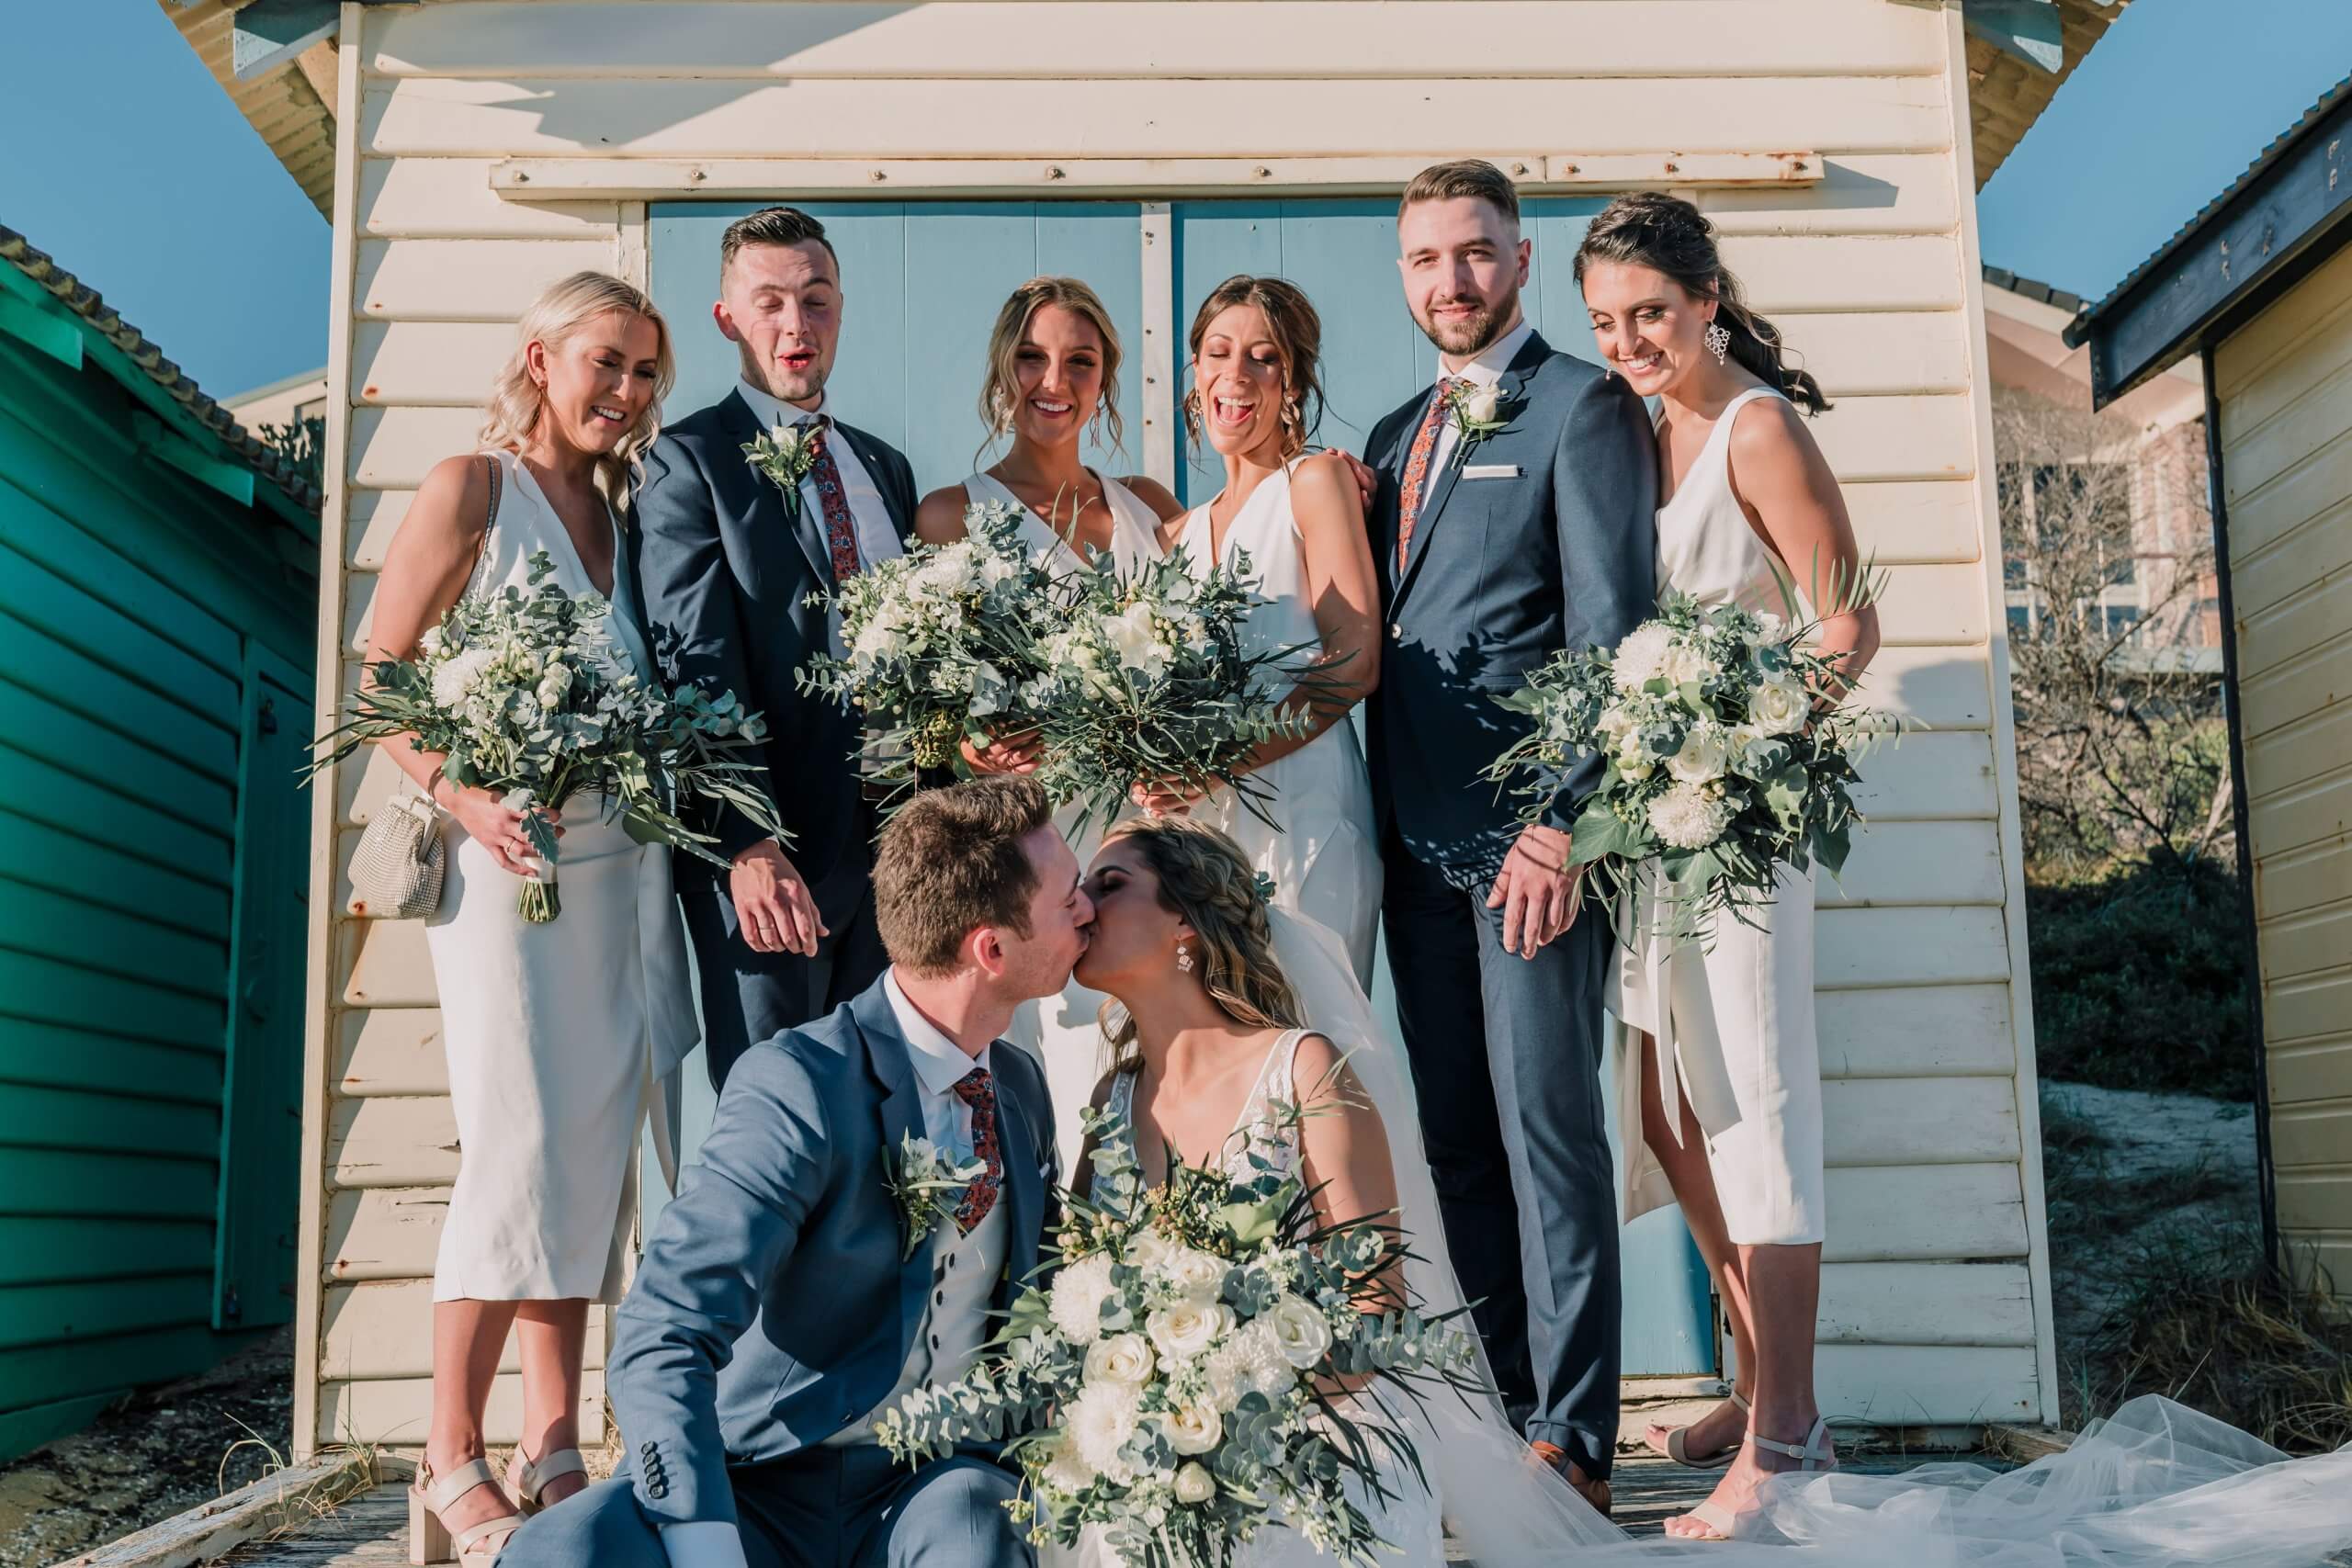 With their bridal party behind them, the newlywed shares a sweet kiss.